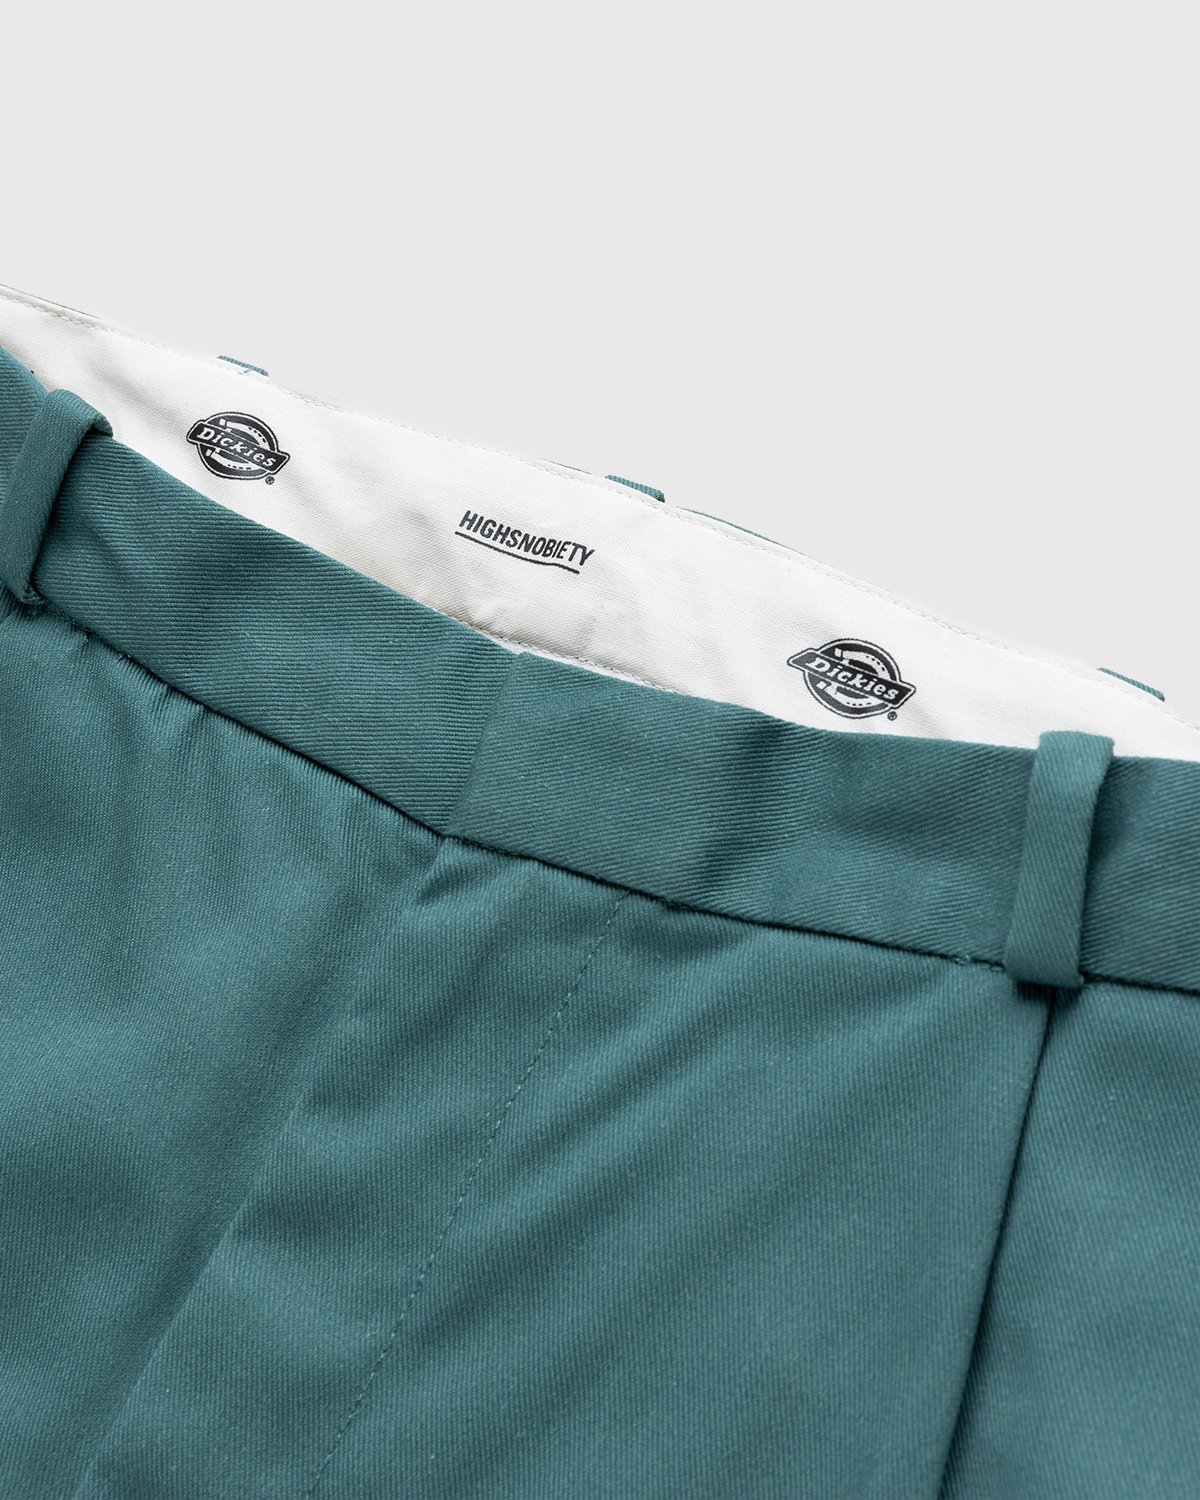 Highsnobiety x Dickies - Pleated Work Pants Lincoln Green - Clothing - Green - Image 3